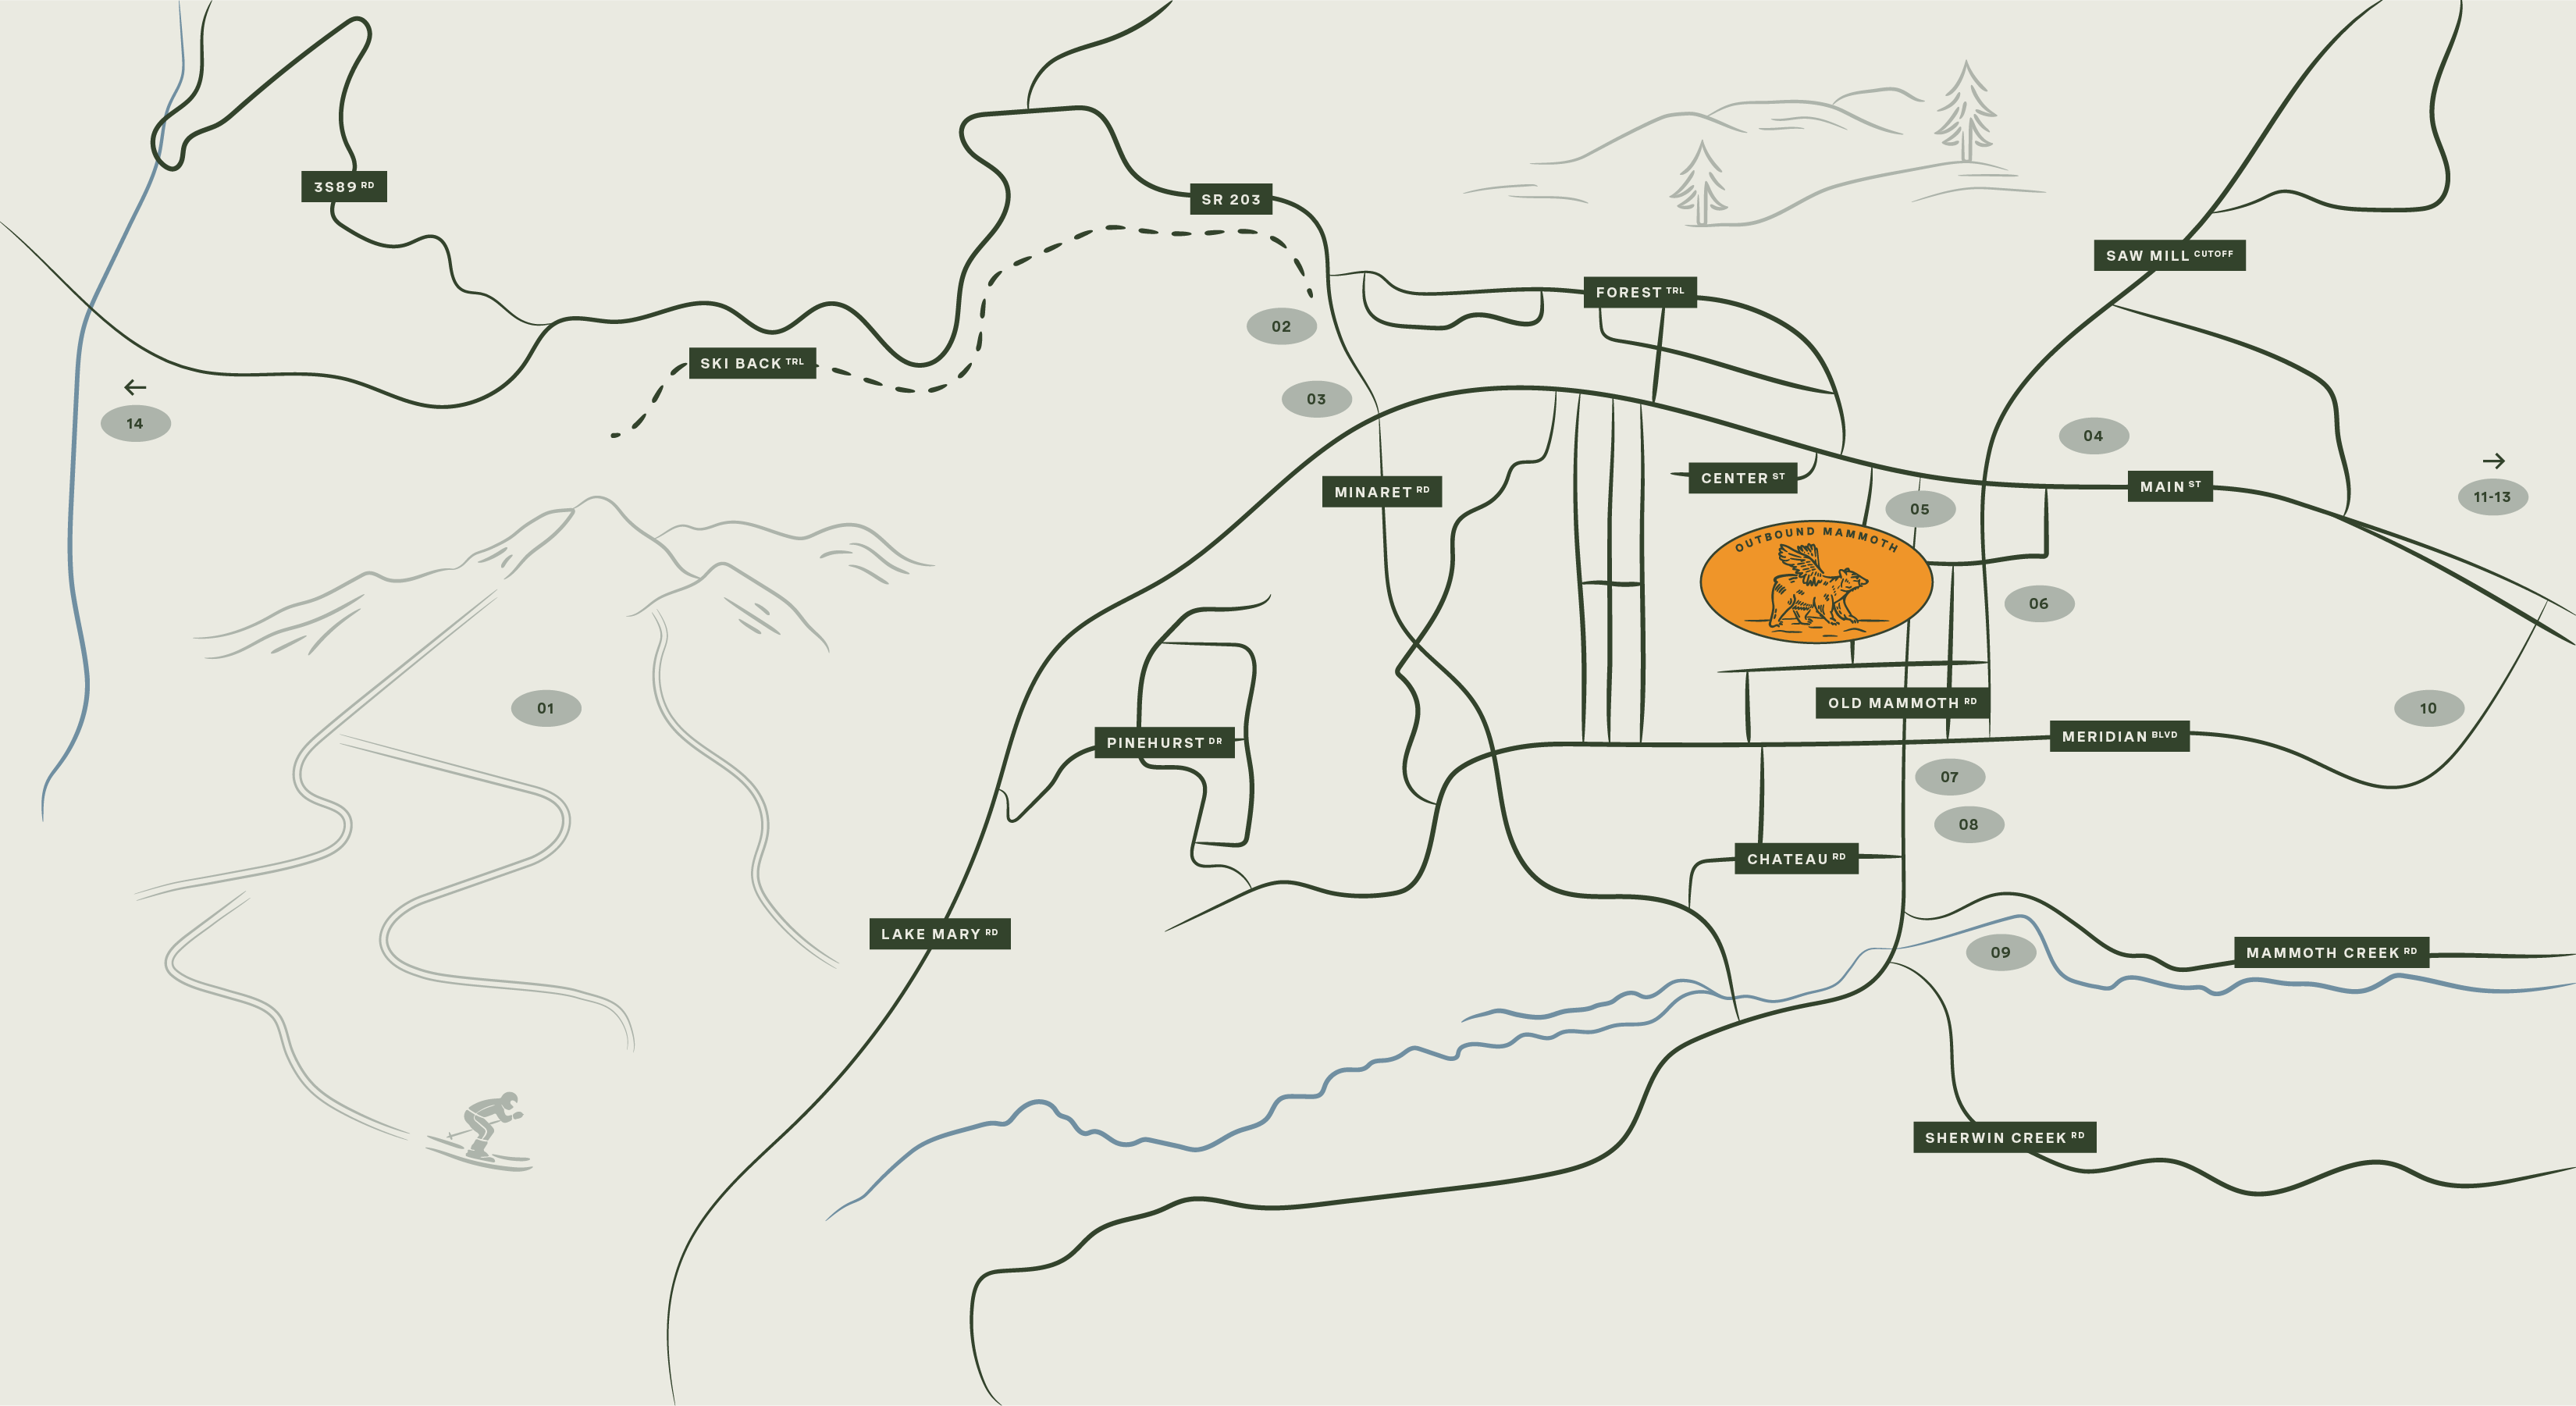 Outbound's Mammoth Property Area Map streamlines navigation and exploration for efficient use.